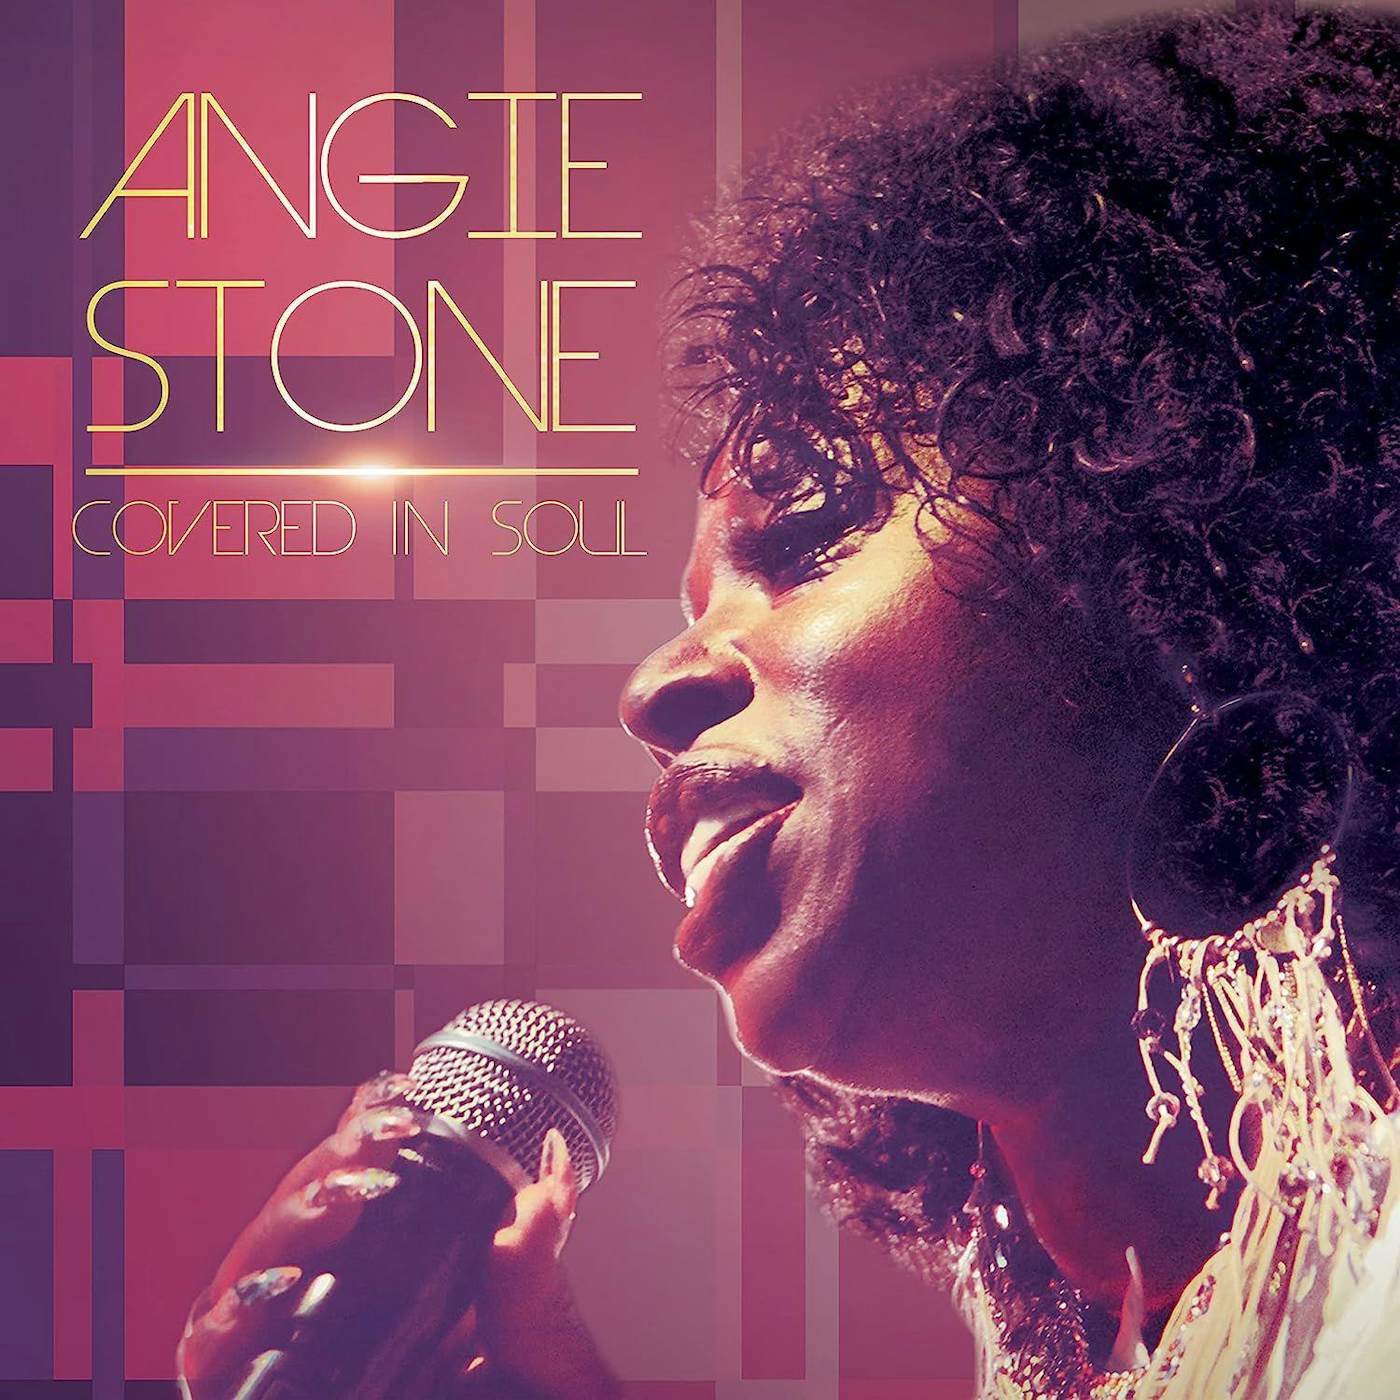 Angie Stone Covered In Soul (Purple) Vinyl Record